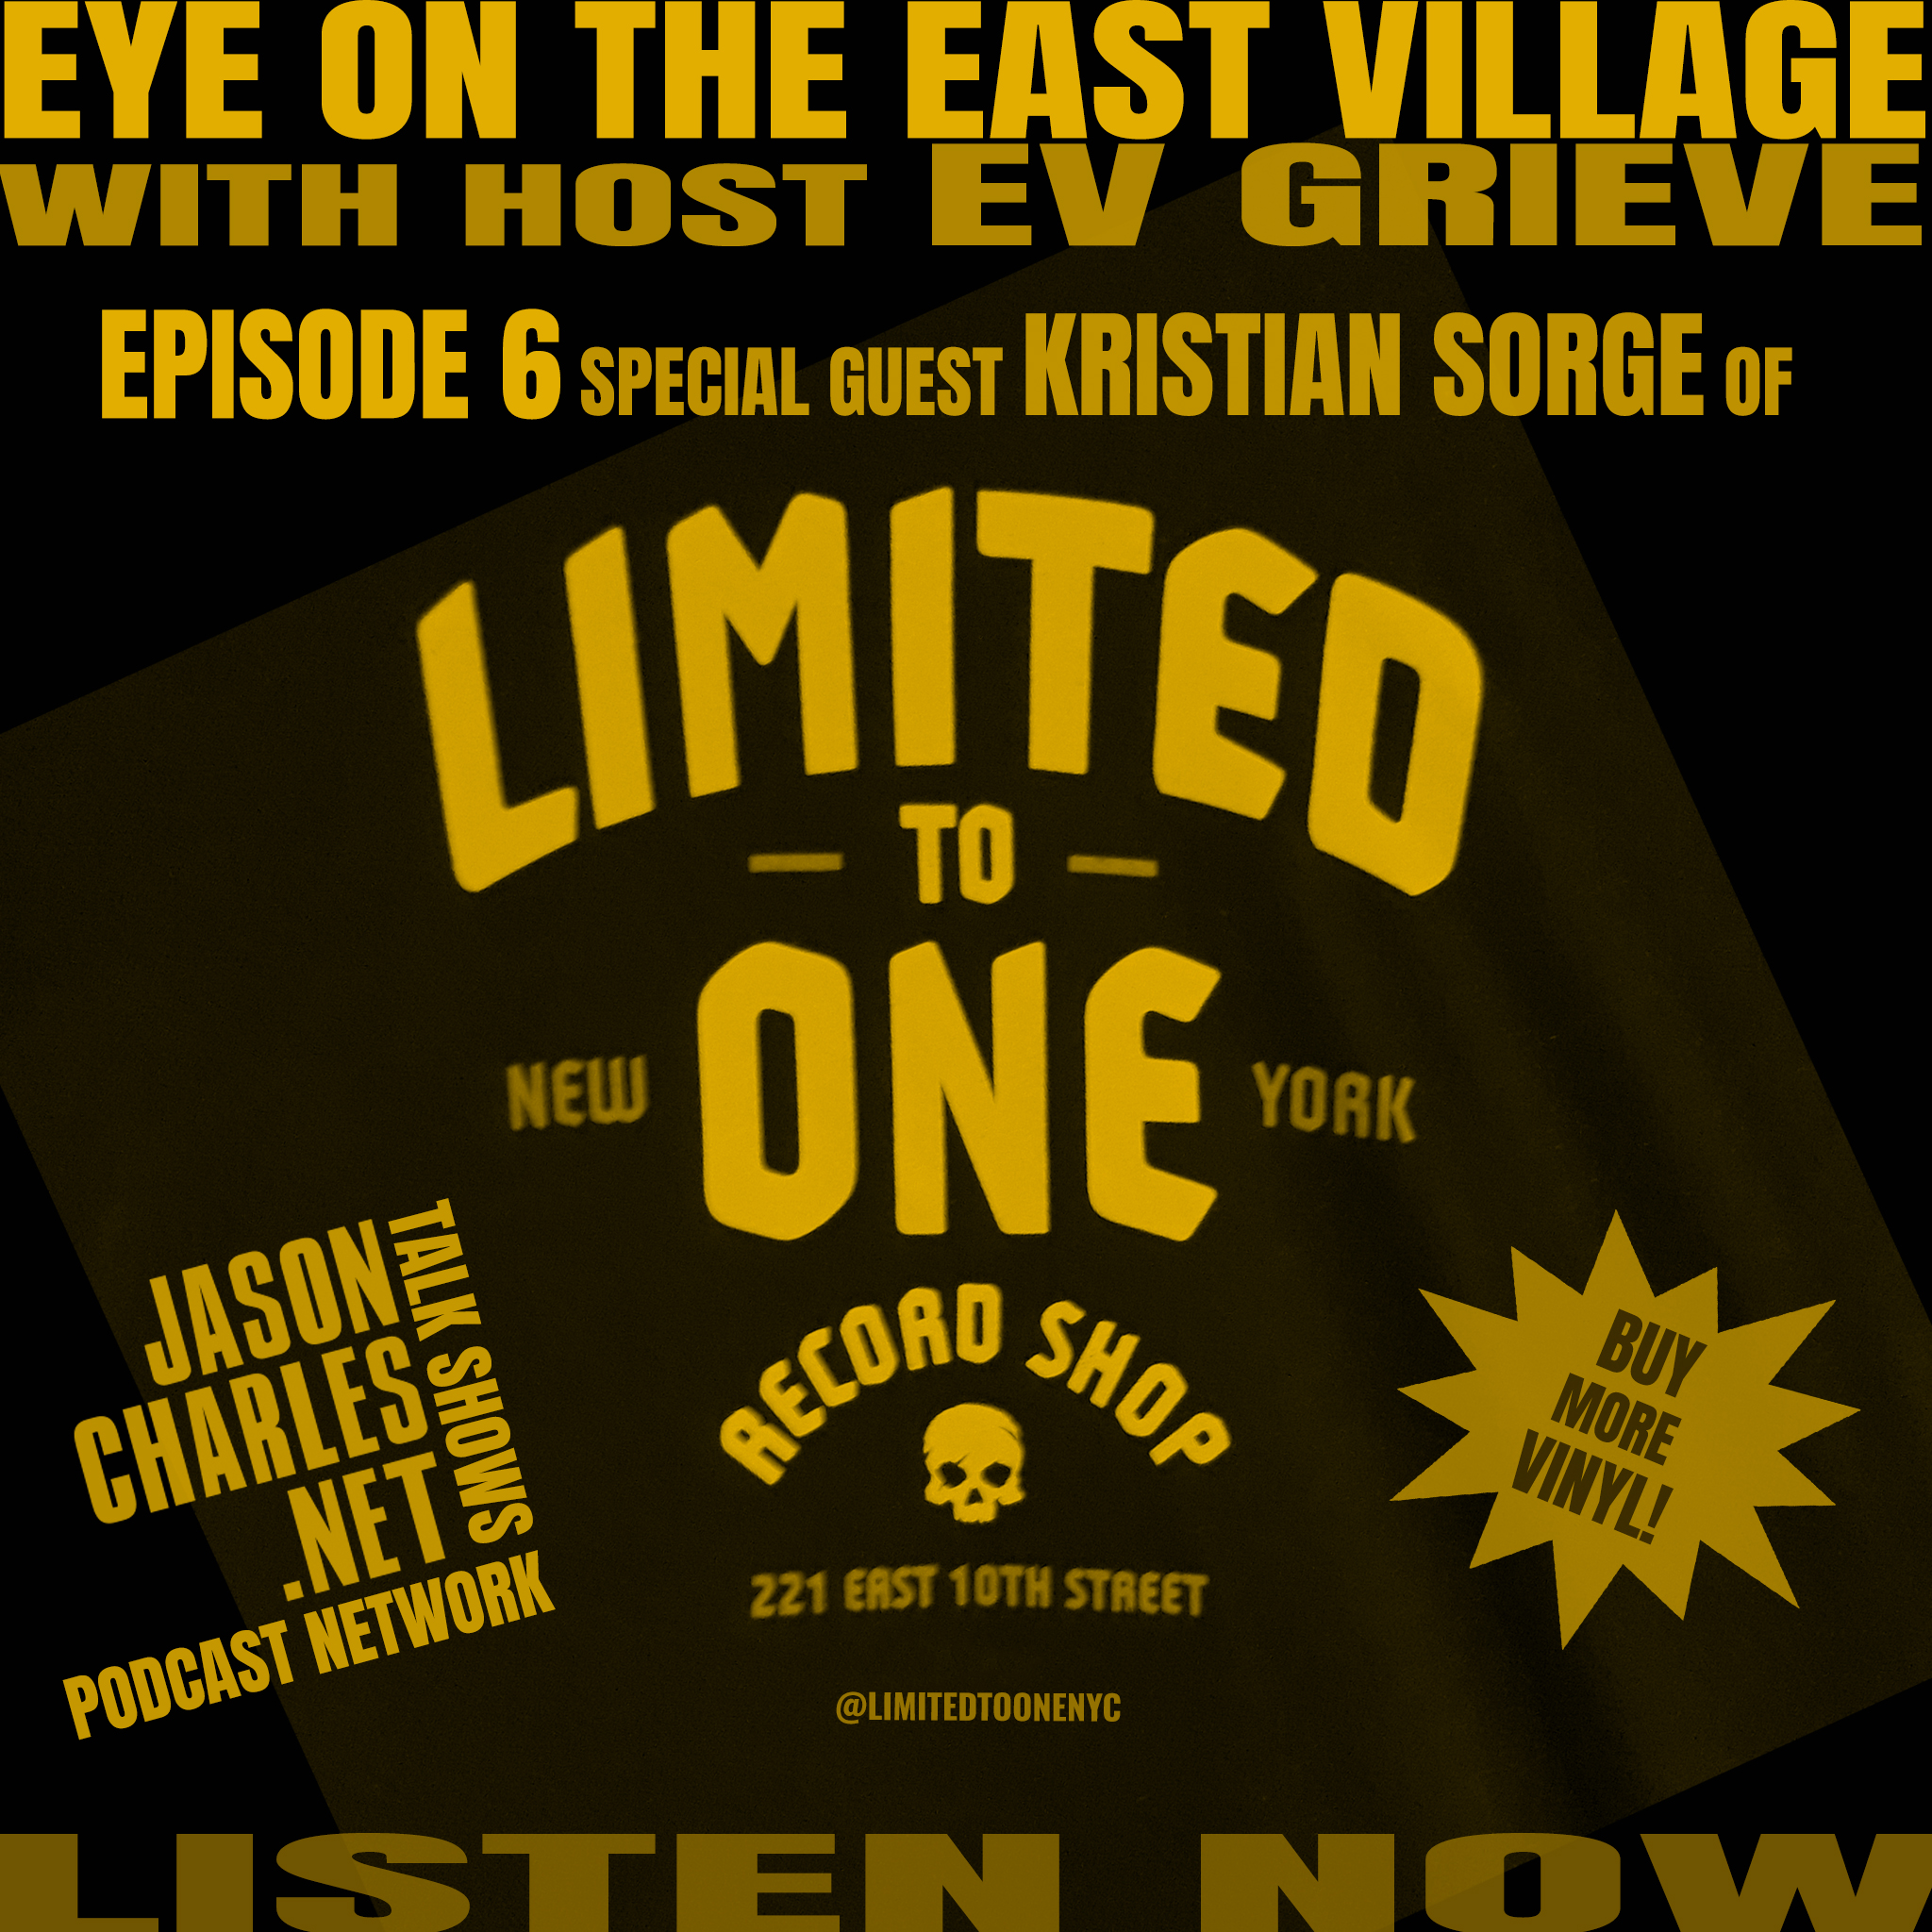 EYE ON THE EAST VILLAGE Episode 6 Limited to One Record Shop